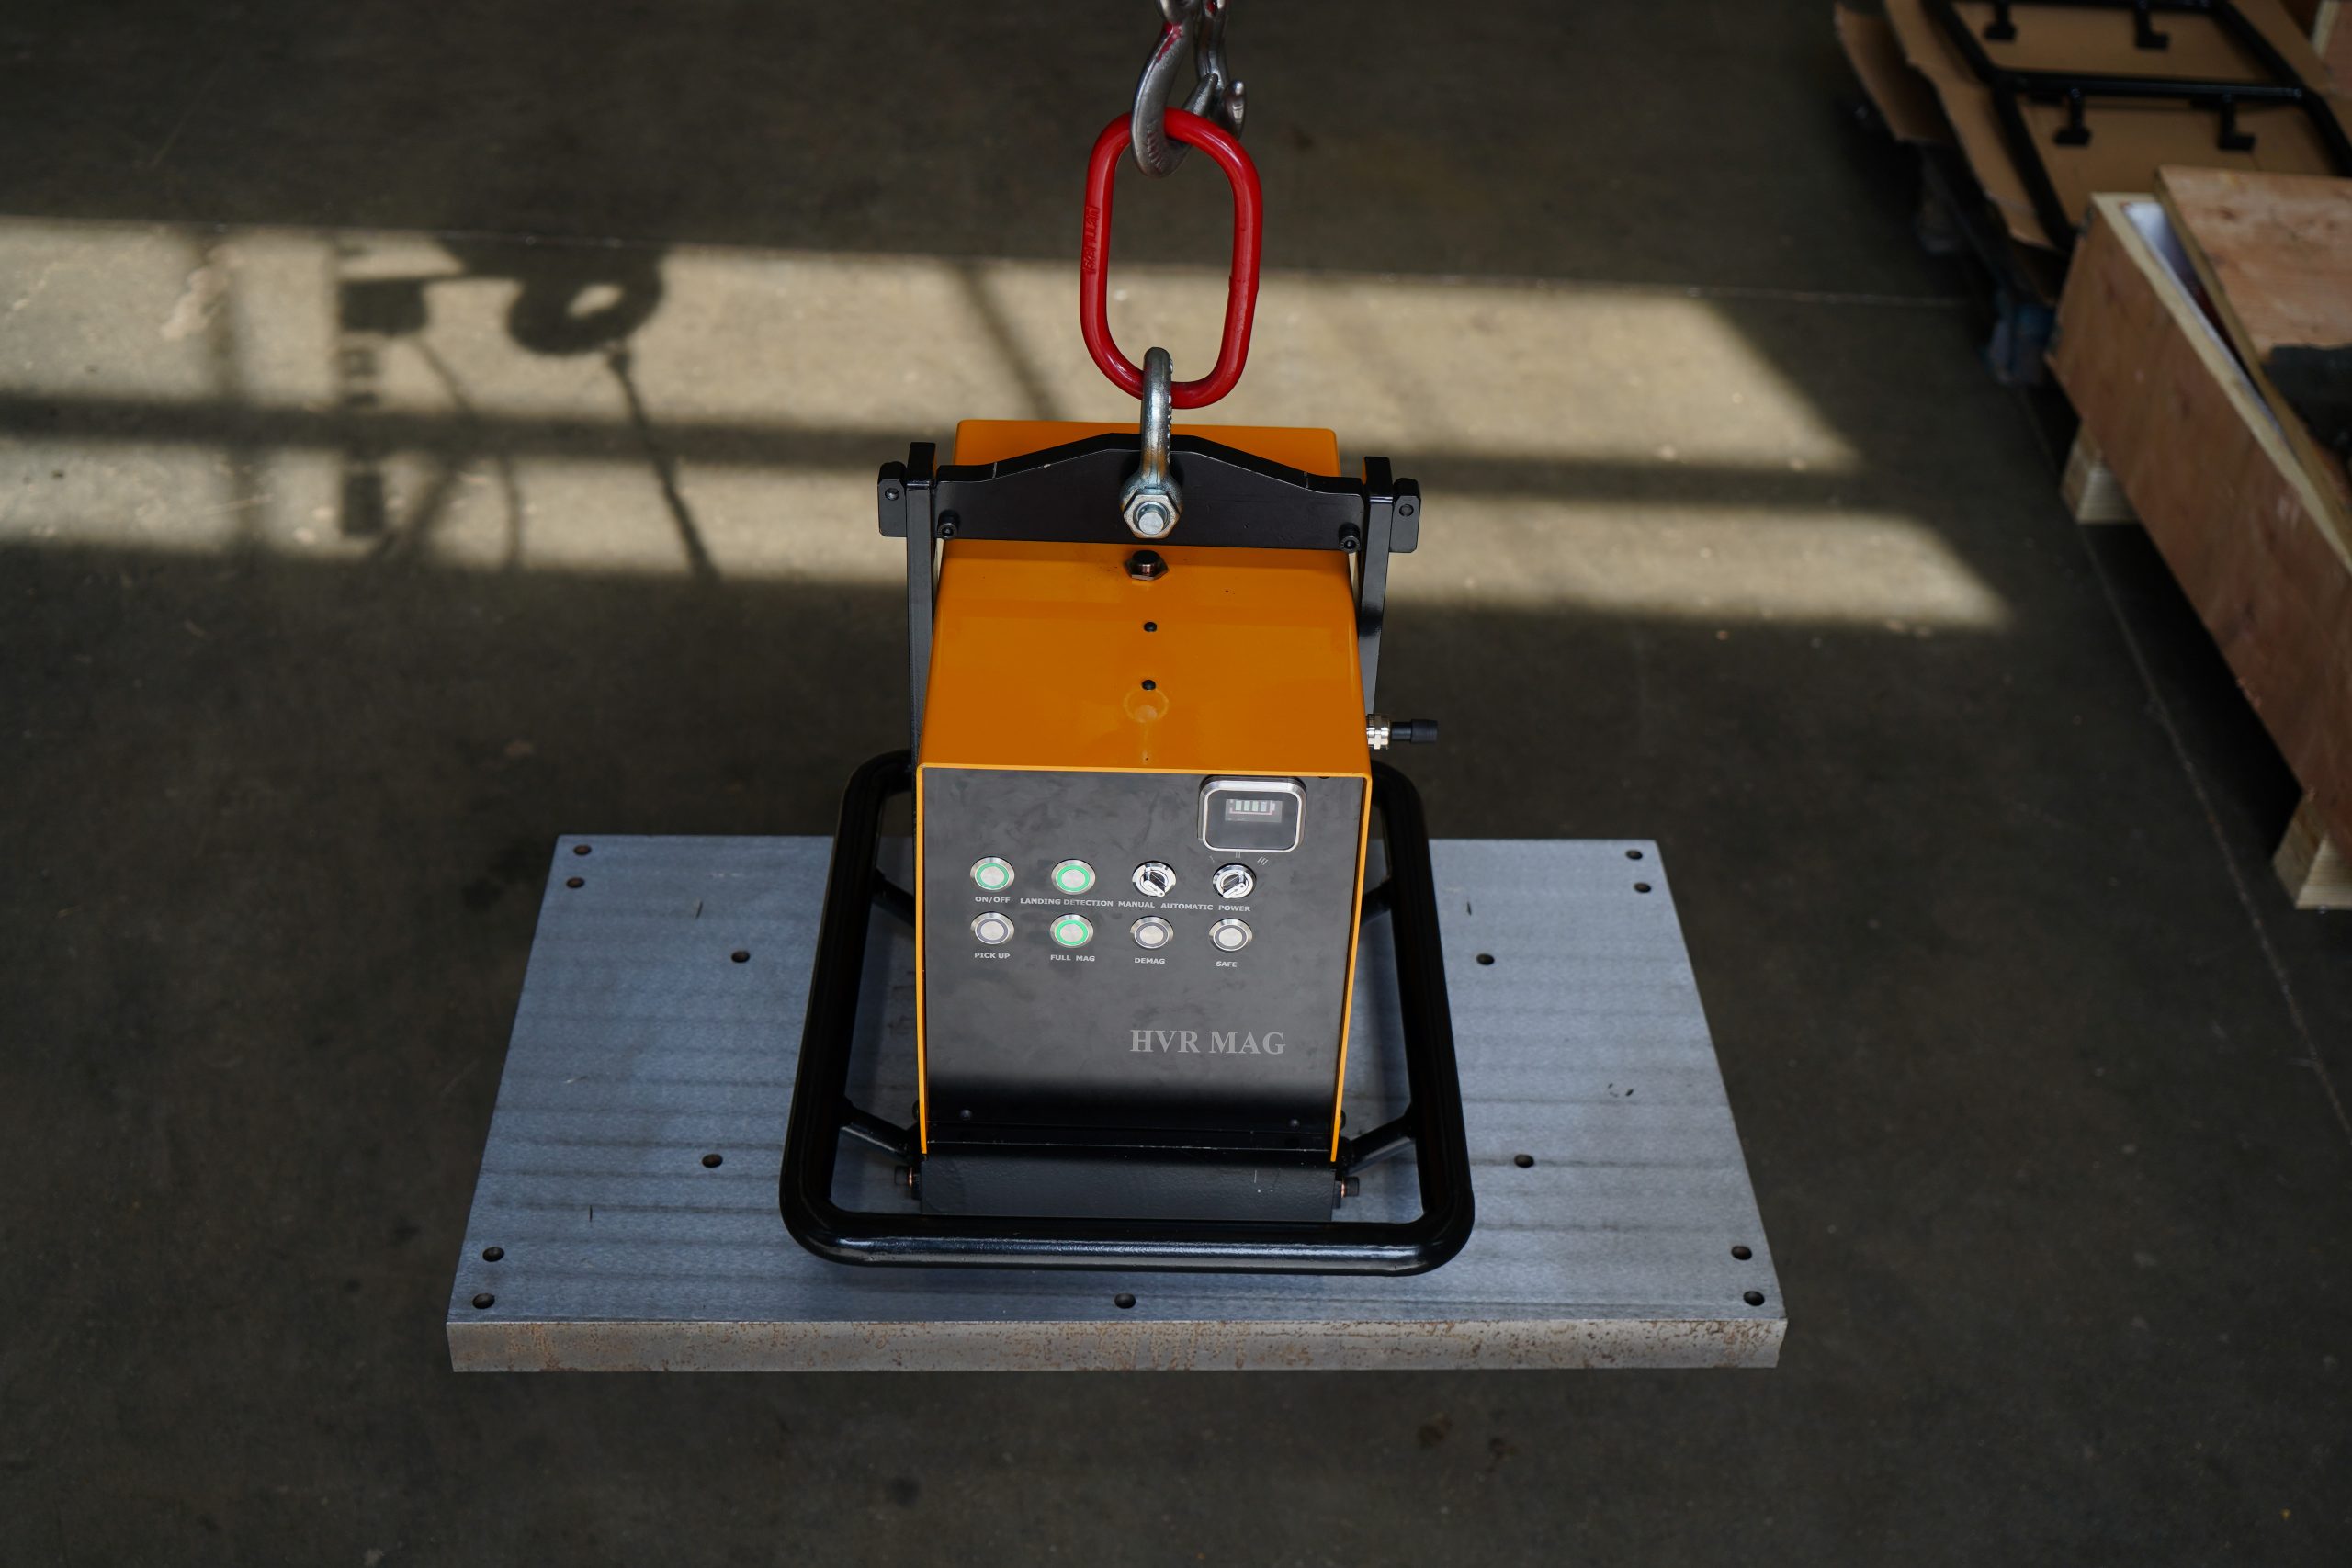 The 5th Generation of Battery Operated Magnetic Plate Lifter - HVR MAG